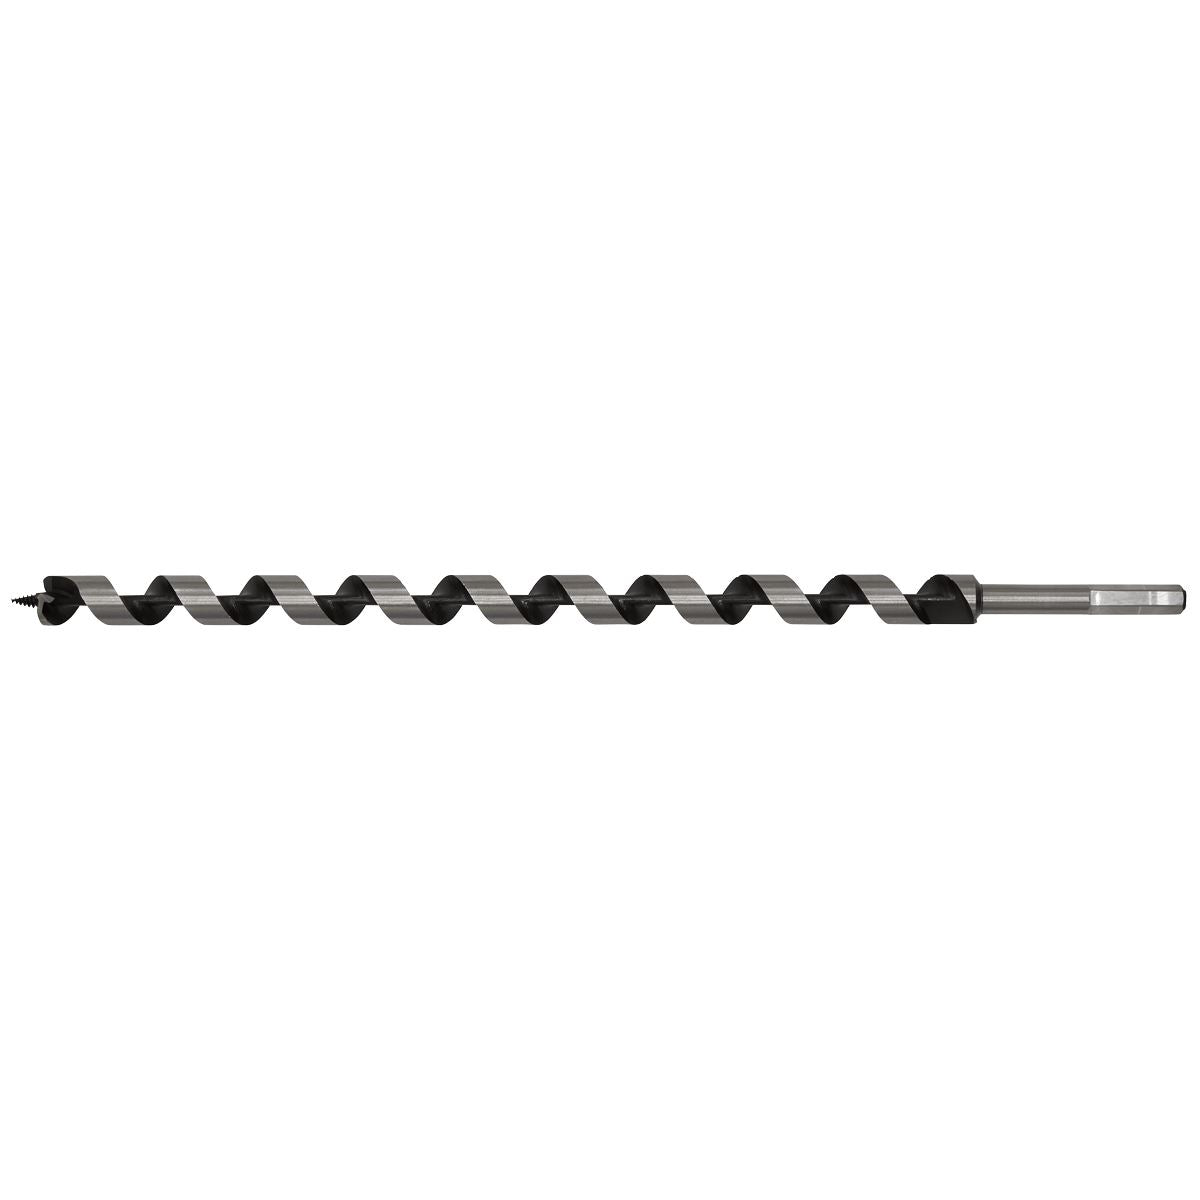 Worksafe by Sealey Auger Wood Drill Bit 20mm x 460mm